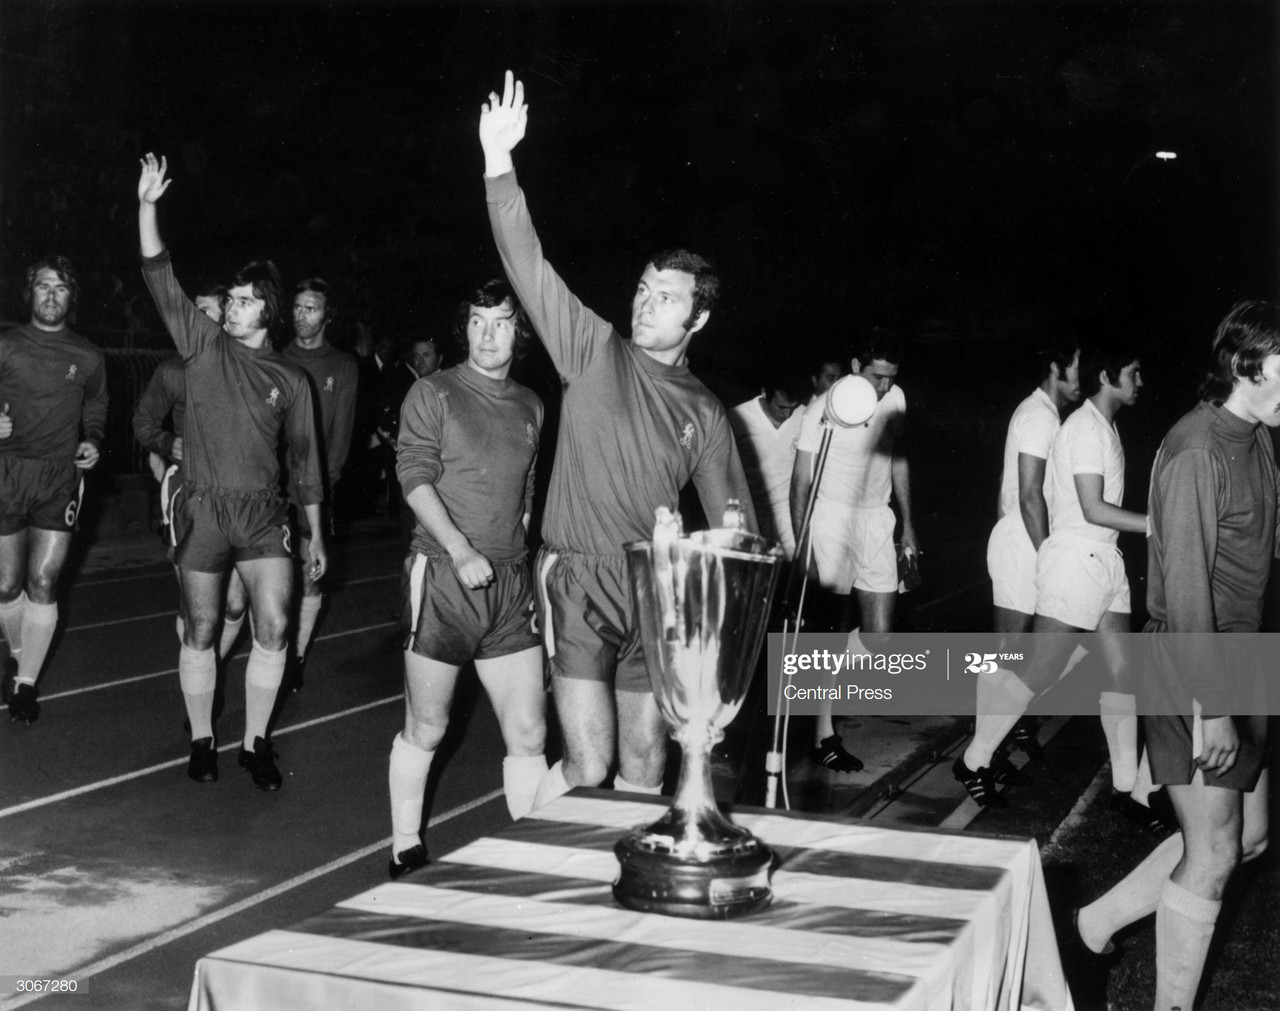 From schoolboy games to Gento and Greece: Johnny Boyle and the Cup Winners Cup